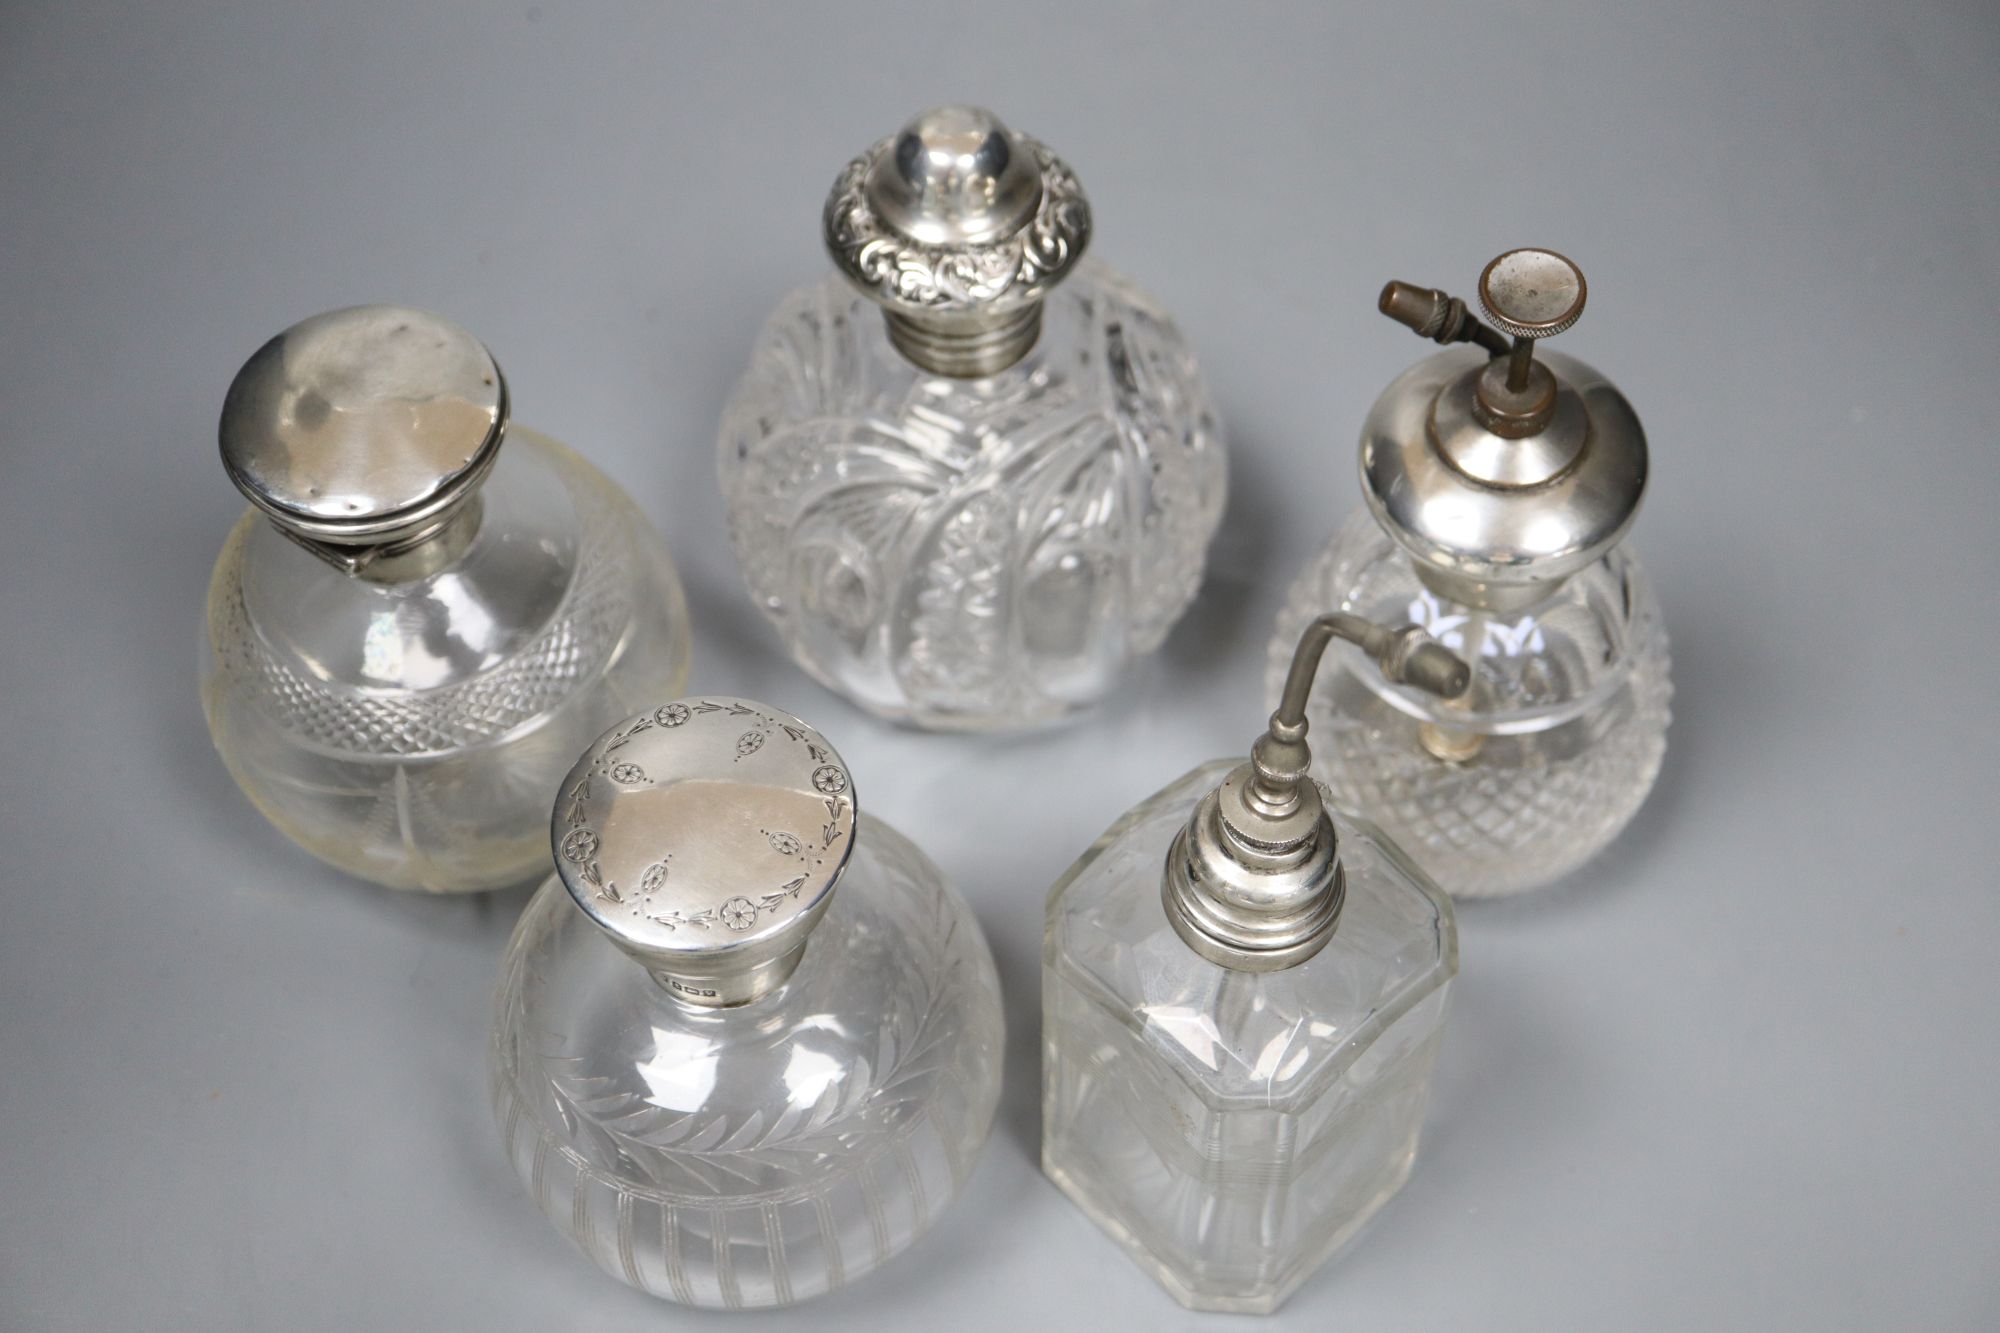 Two silver mounted glass atomisers and three silver mounted glass scent bottles, tallest overall 16cm.